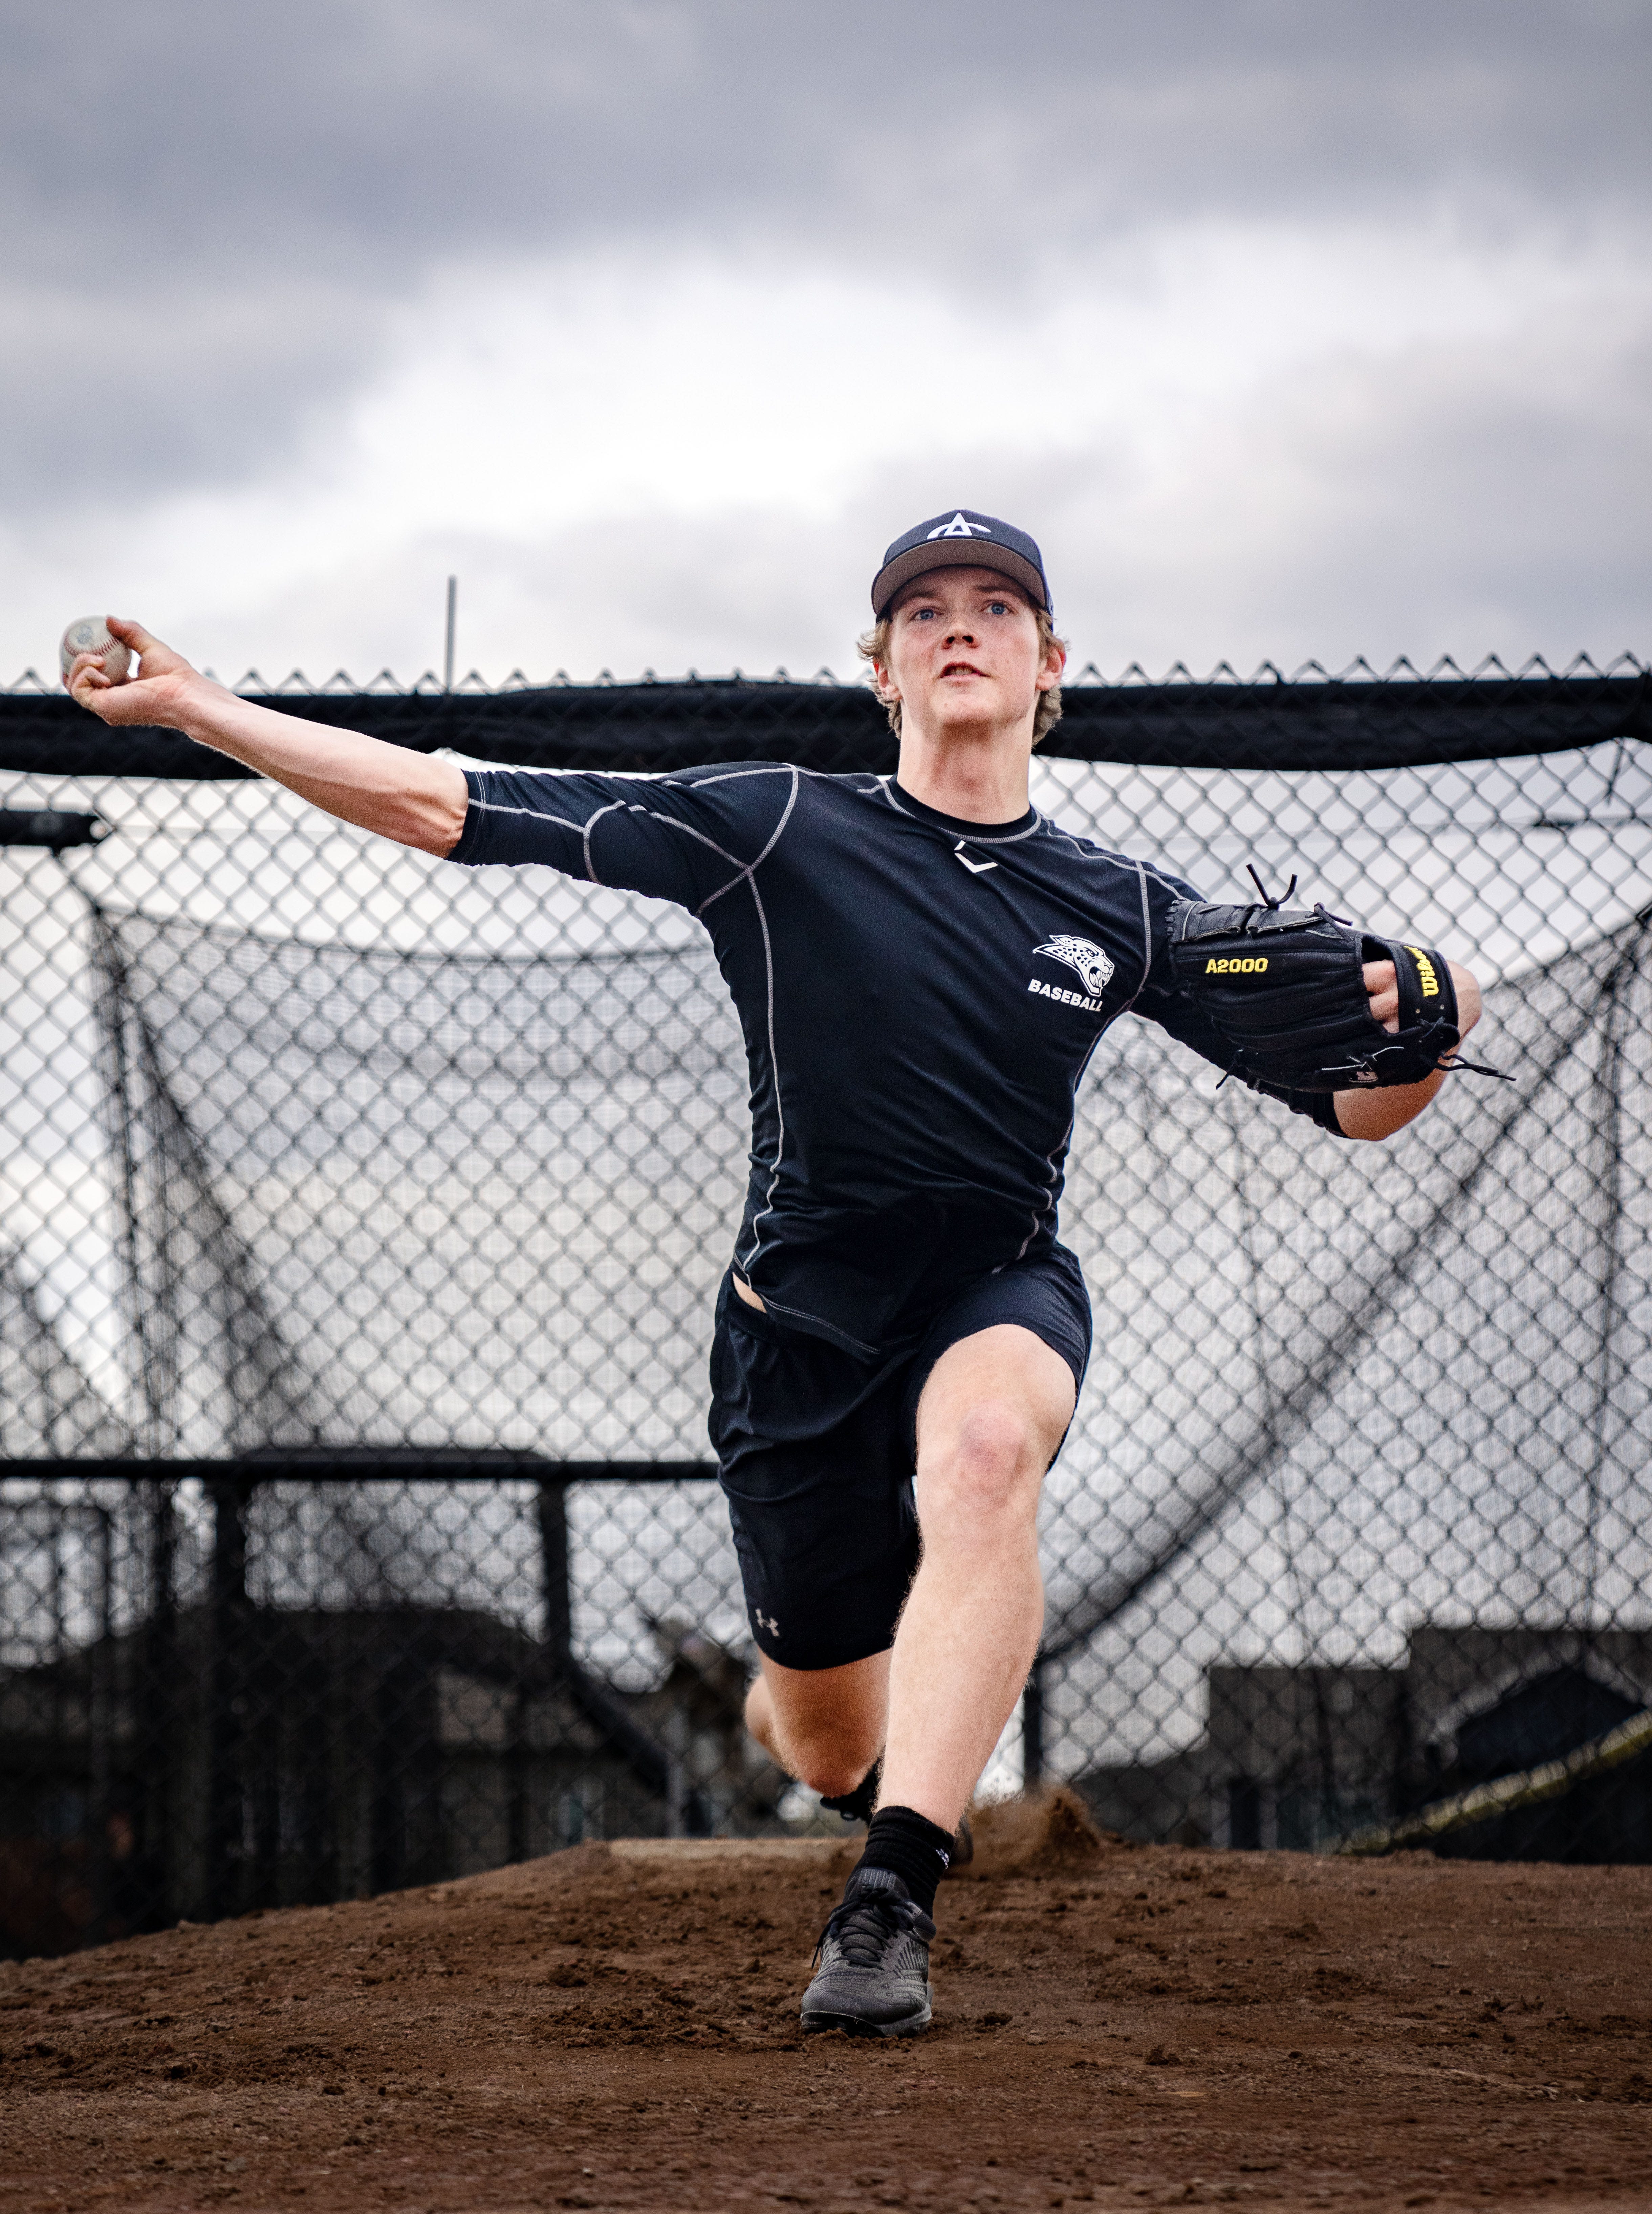 Ankeny Centennial High School pitcher Joey Oakie faces huge decision with the MLB Draft